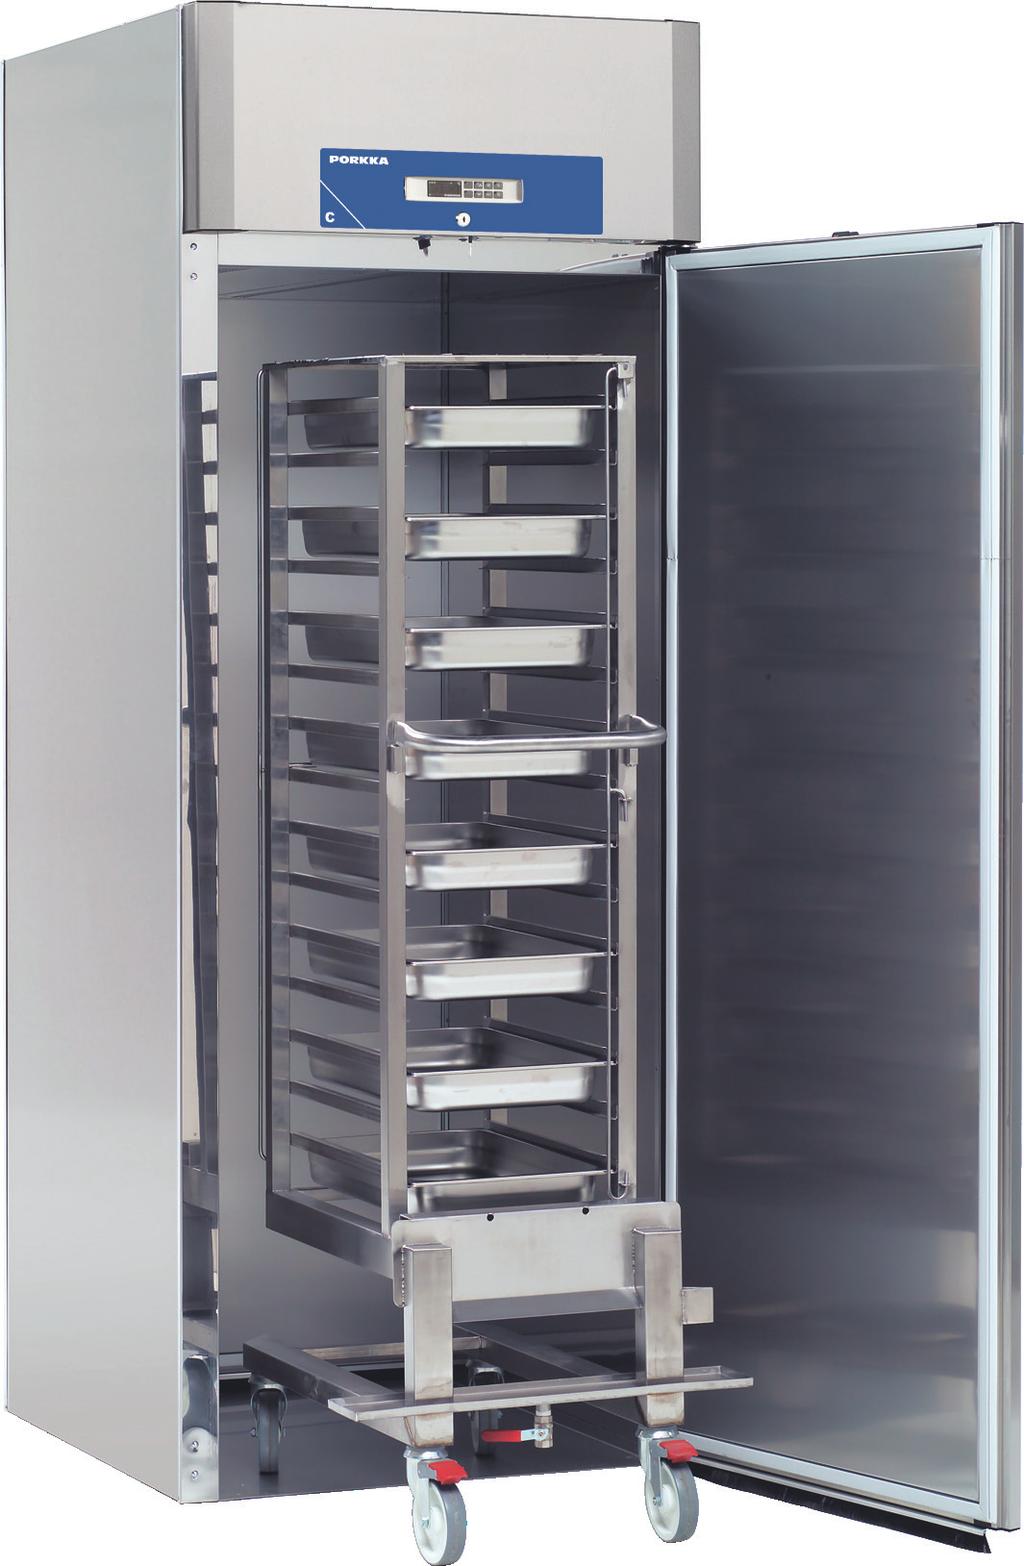 Professional roll-in cabinets Future chiller Roll-in cabinet RIC R290 RIC 960 E RIC 960 CC RIC 960 CO2 RIC 960 E with floor and ramp RIC 960 CC with floor and ramp RIC 960 CO2 with floor and ramp